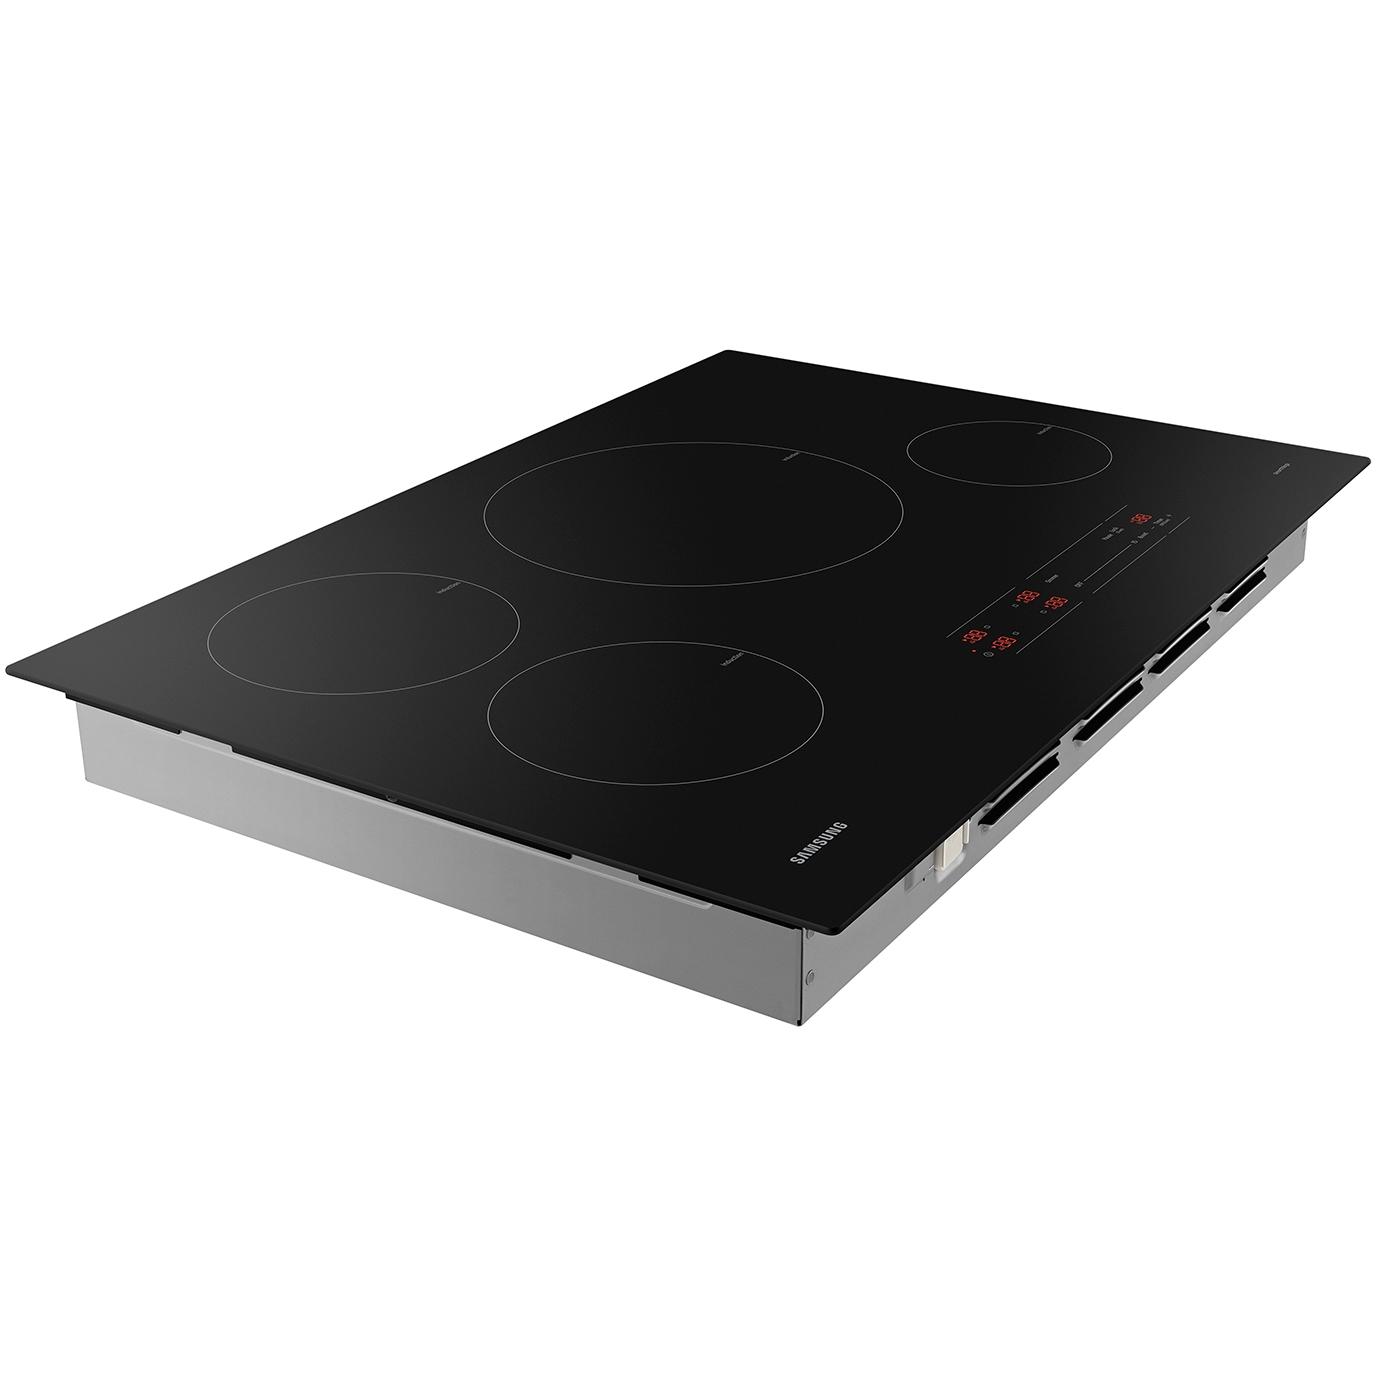 Samsung 30-inch built-in Induction Cooktop with Wi-Fi NZ30A3060UK/AA